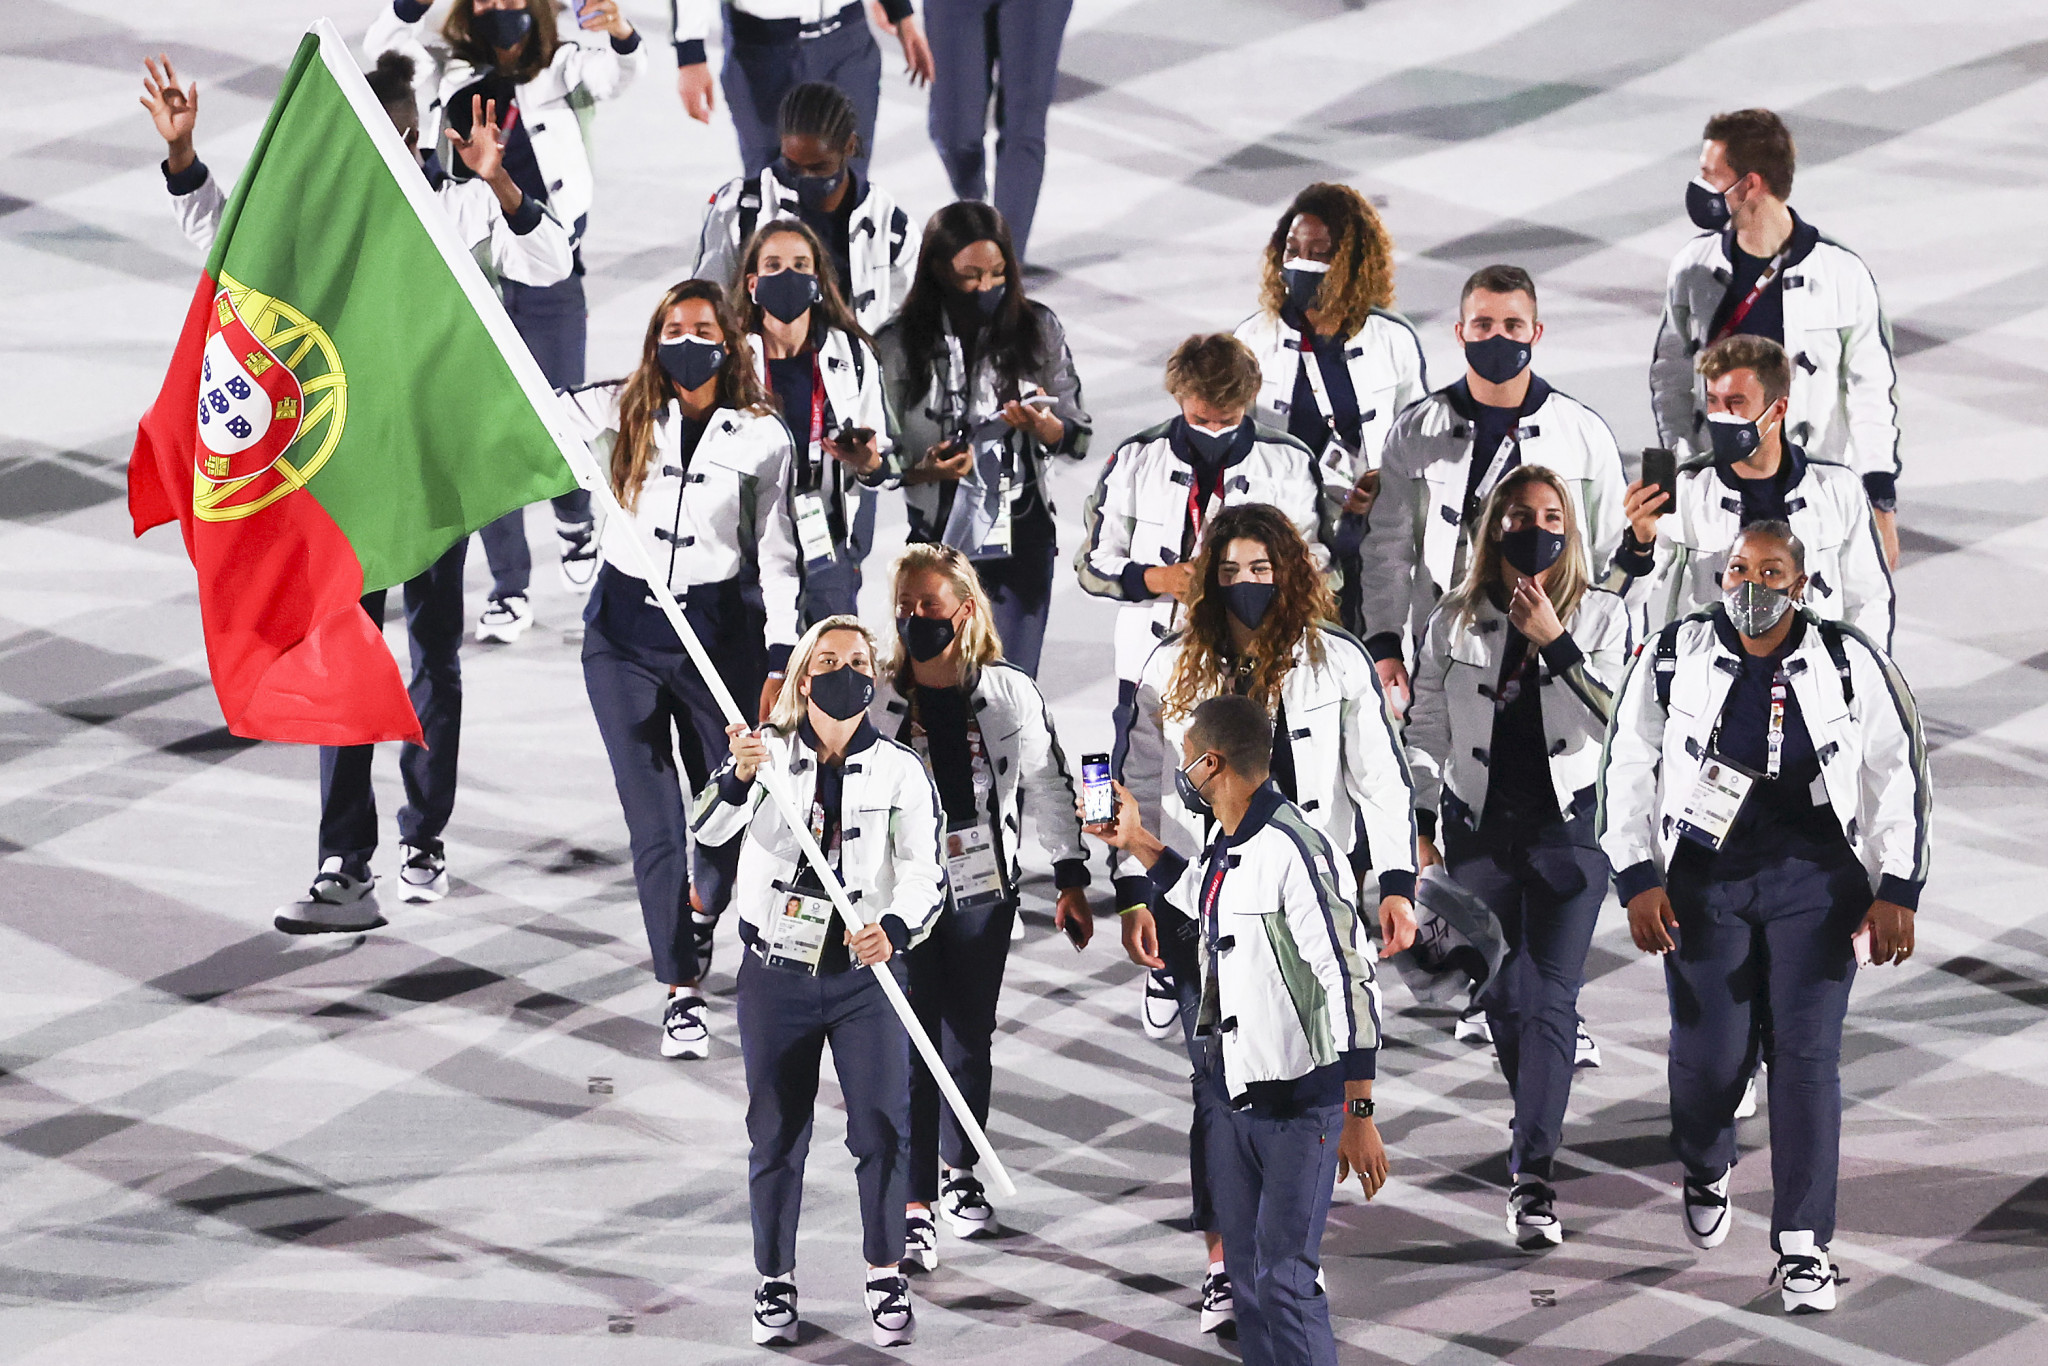 Olympic Committee of Portugal publishes study calling for "cultural change" towards sport